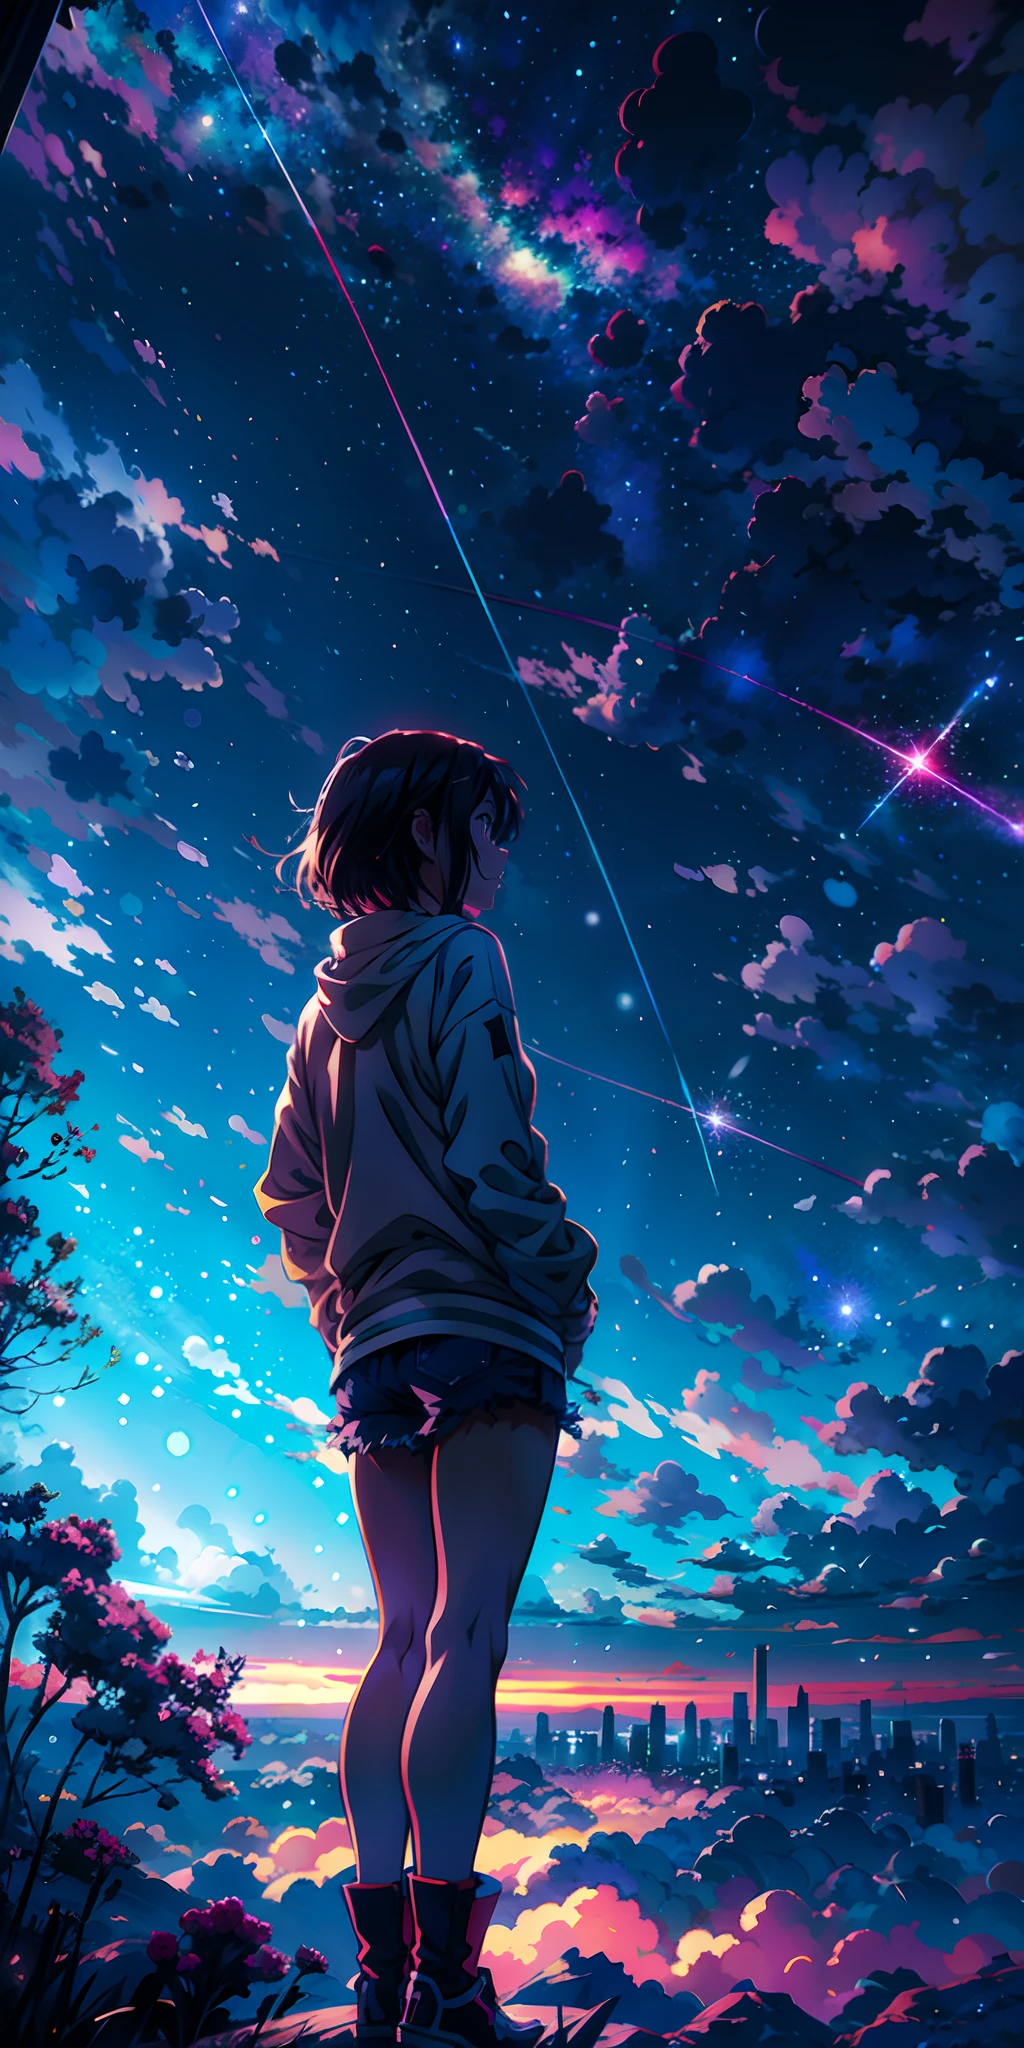 anime wallpapers of a girl looking at a view of the sky and stars, cosmic skies. by makoto shinkai, anime art wallpaper 4 k, anime art wallpaper 4k, anime art wallpaper 8 k, anime sky, amazing wallpaper, anime wallpaper 4 k, anime wallpaper 4k, 4k anime wallpaper, makoto shinkai cyril rolando, anime background art